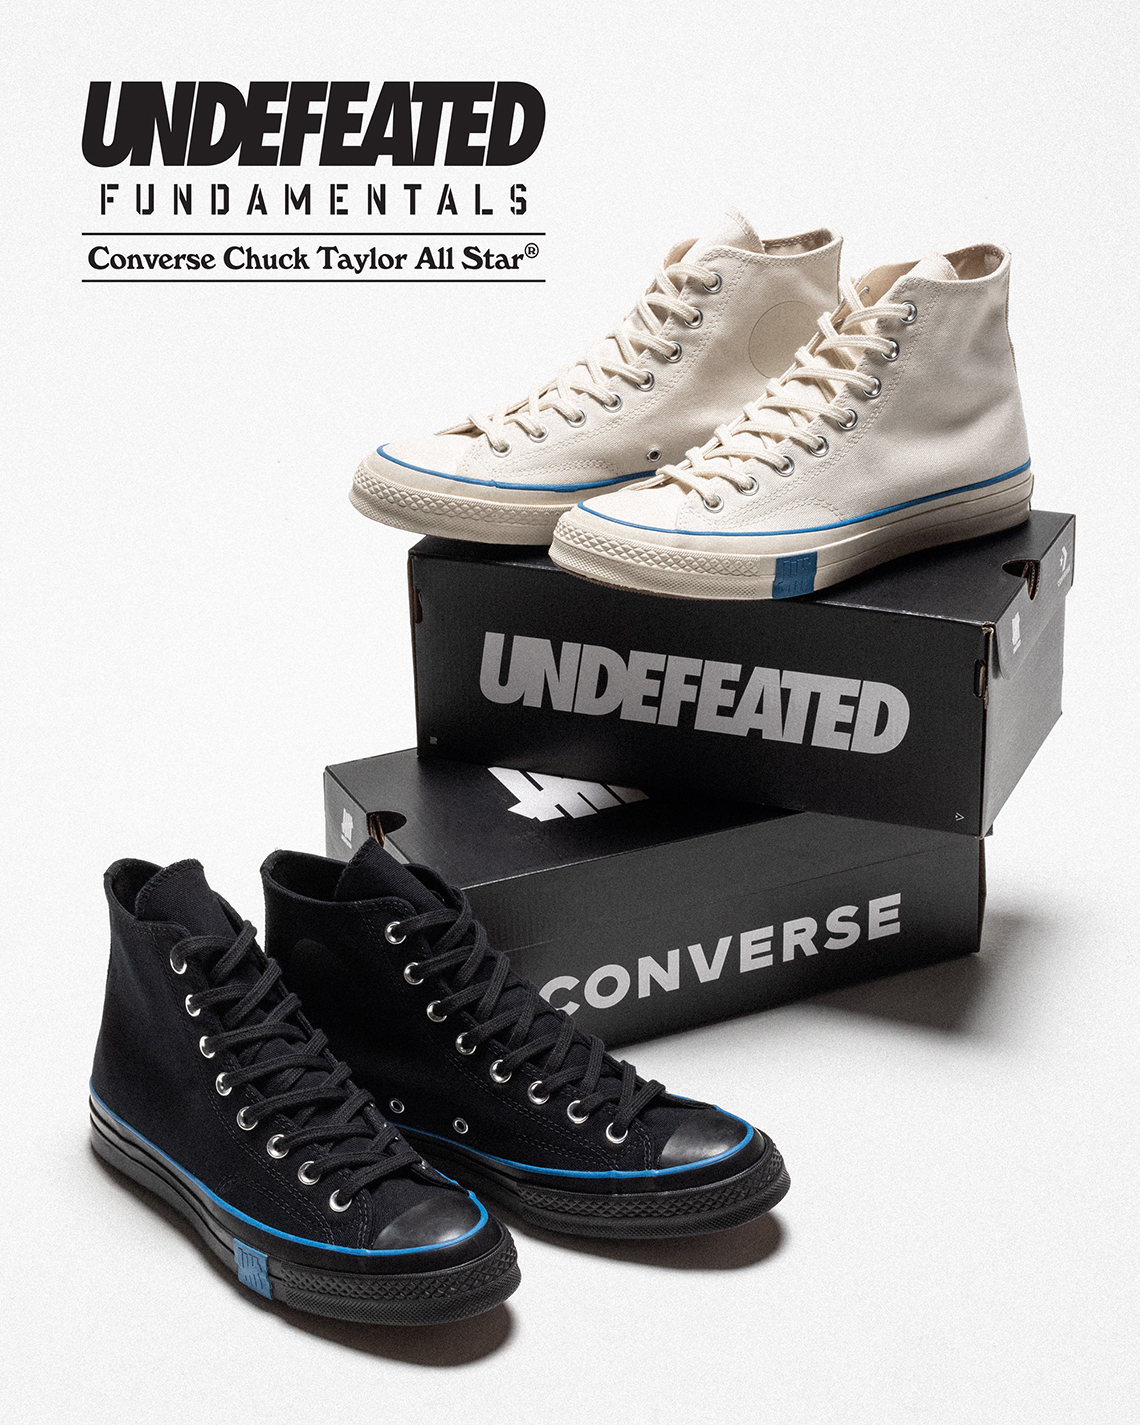 UNDEFEATED x Converse